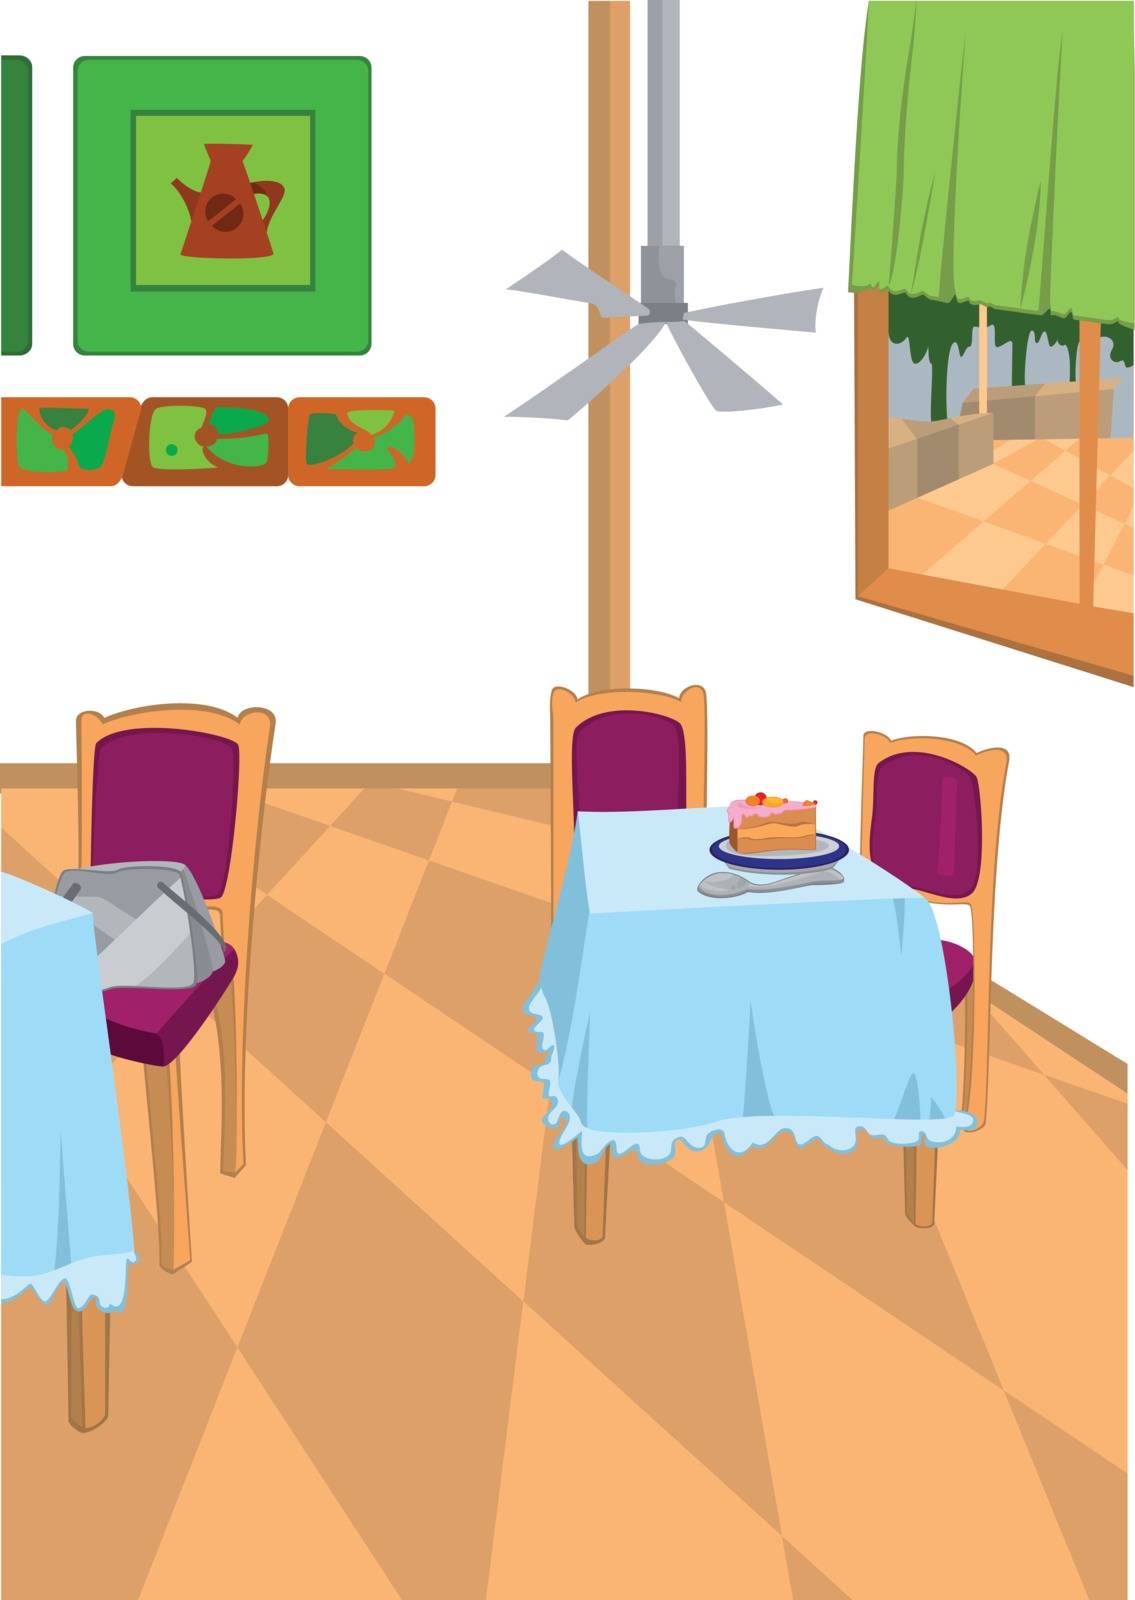 Illustration of retro cartoon interior. Room with two tables, chairs and cake served.




